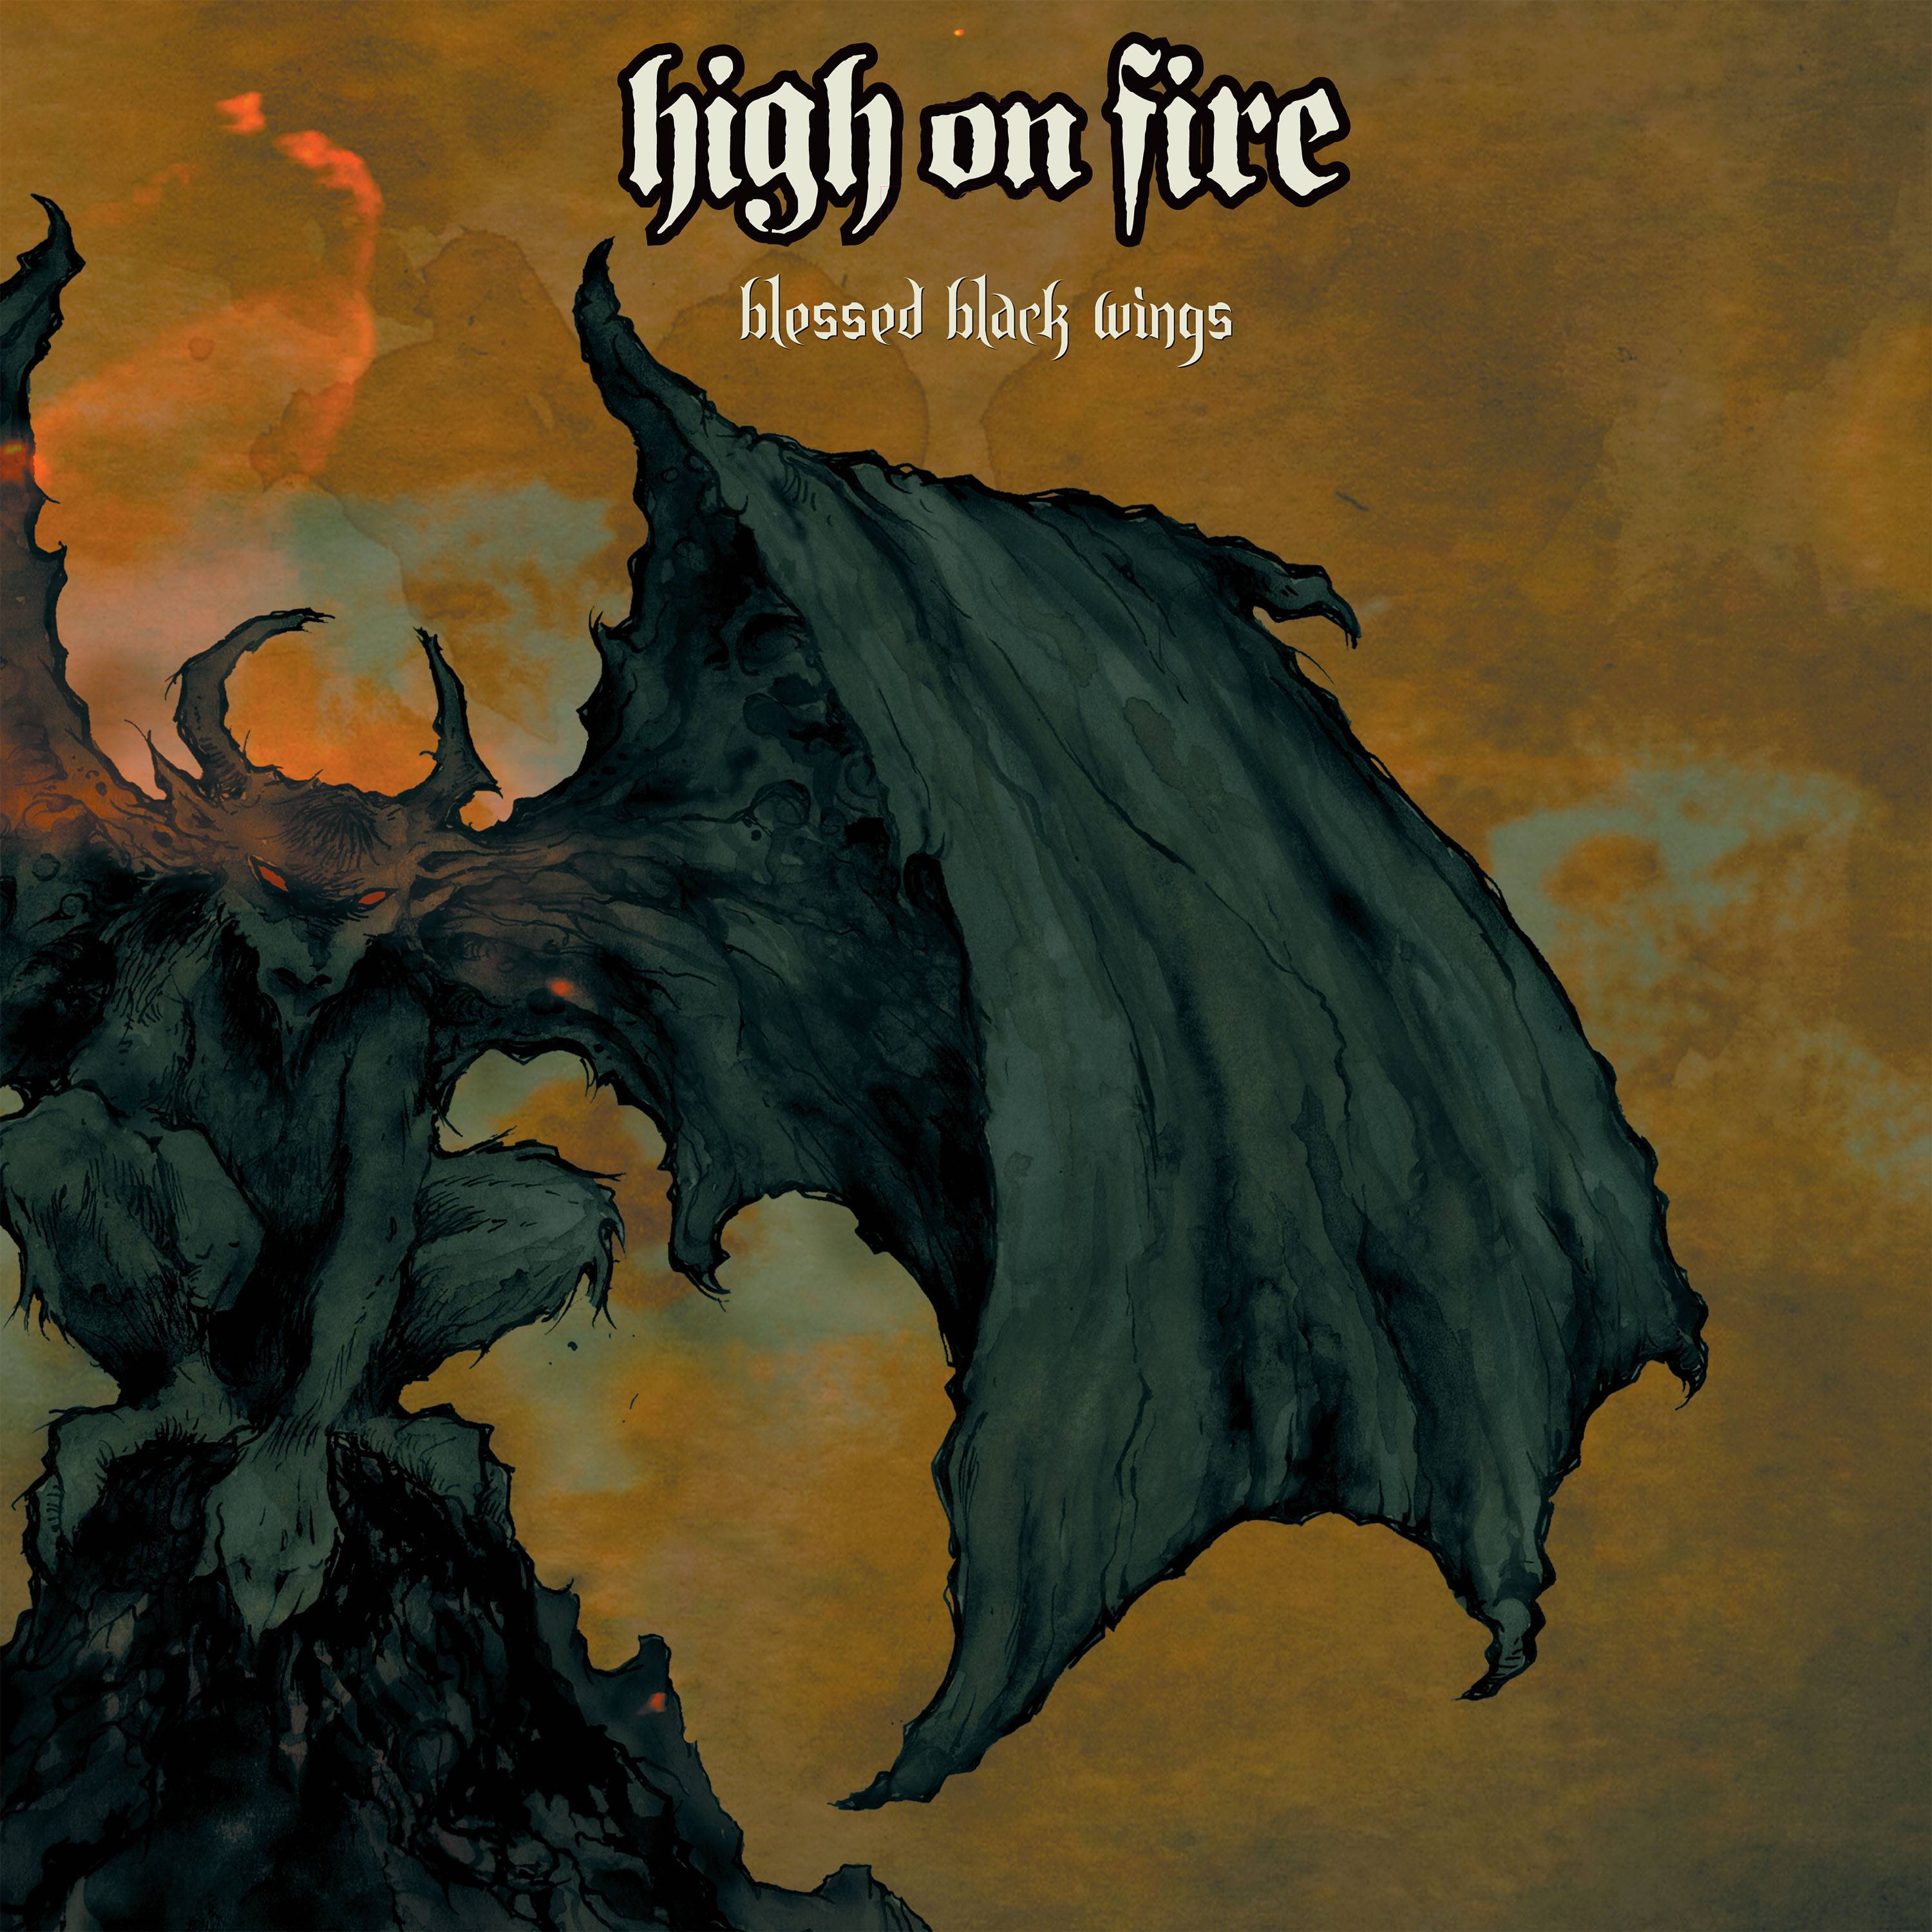 HIGH ON FIRE - Black Wings" - Records